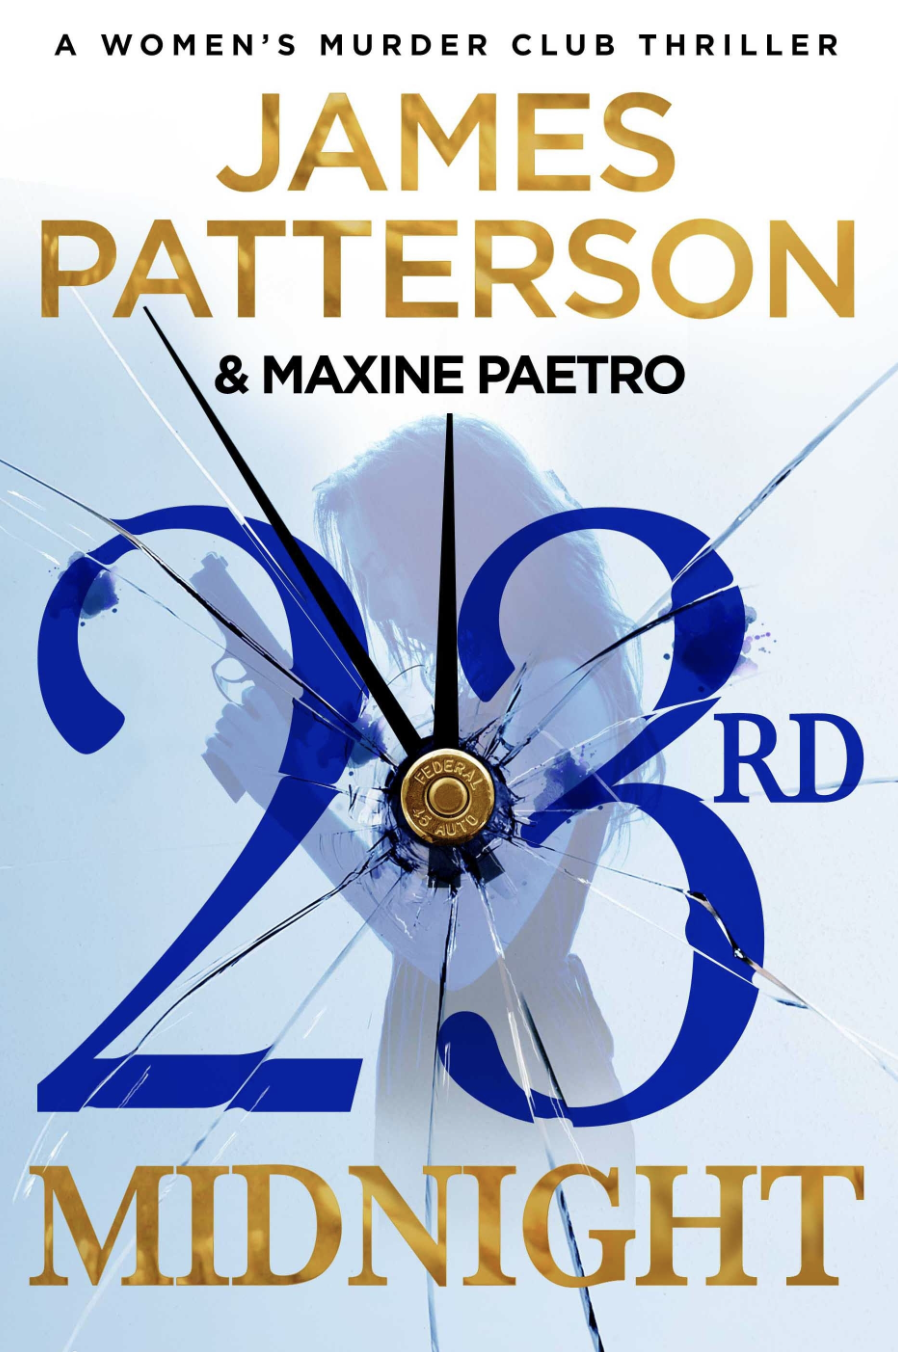 23rd Midnight - James Patterson & Maxine Paetro